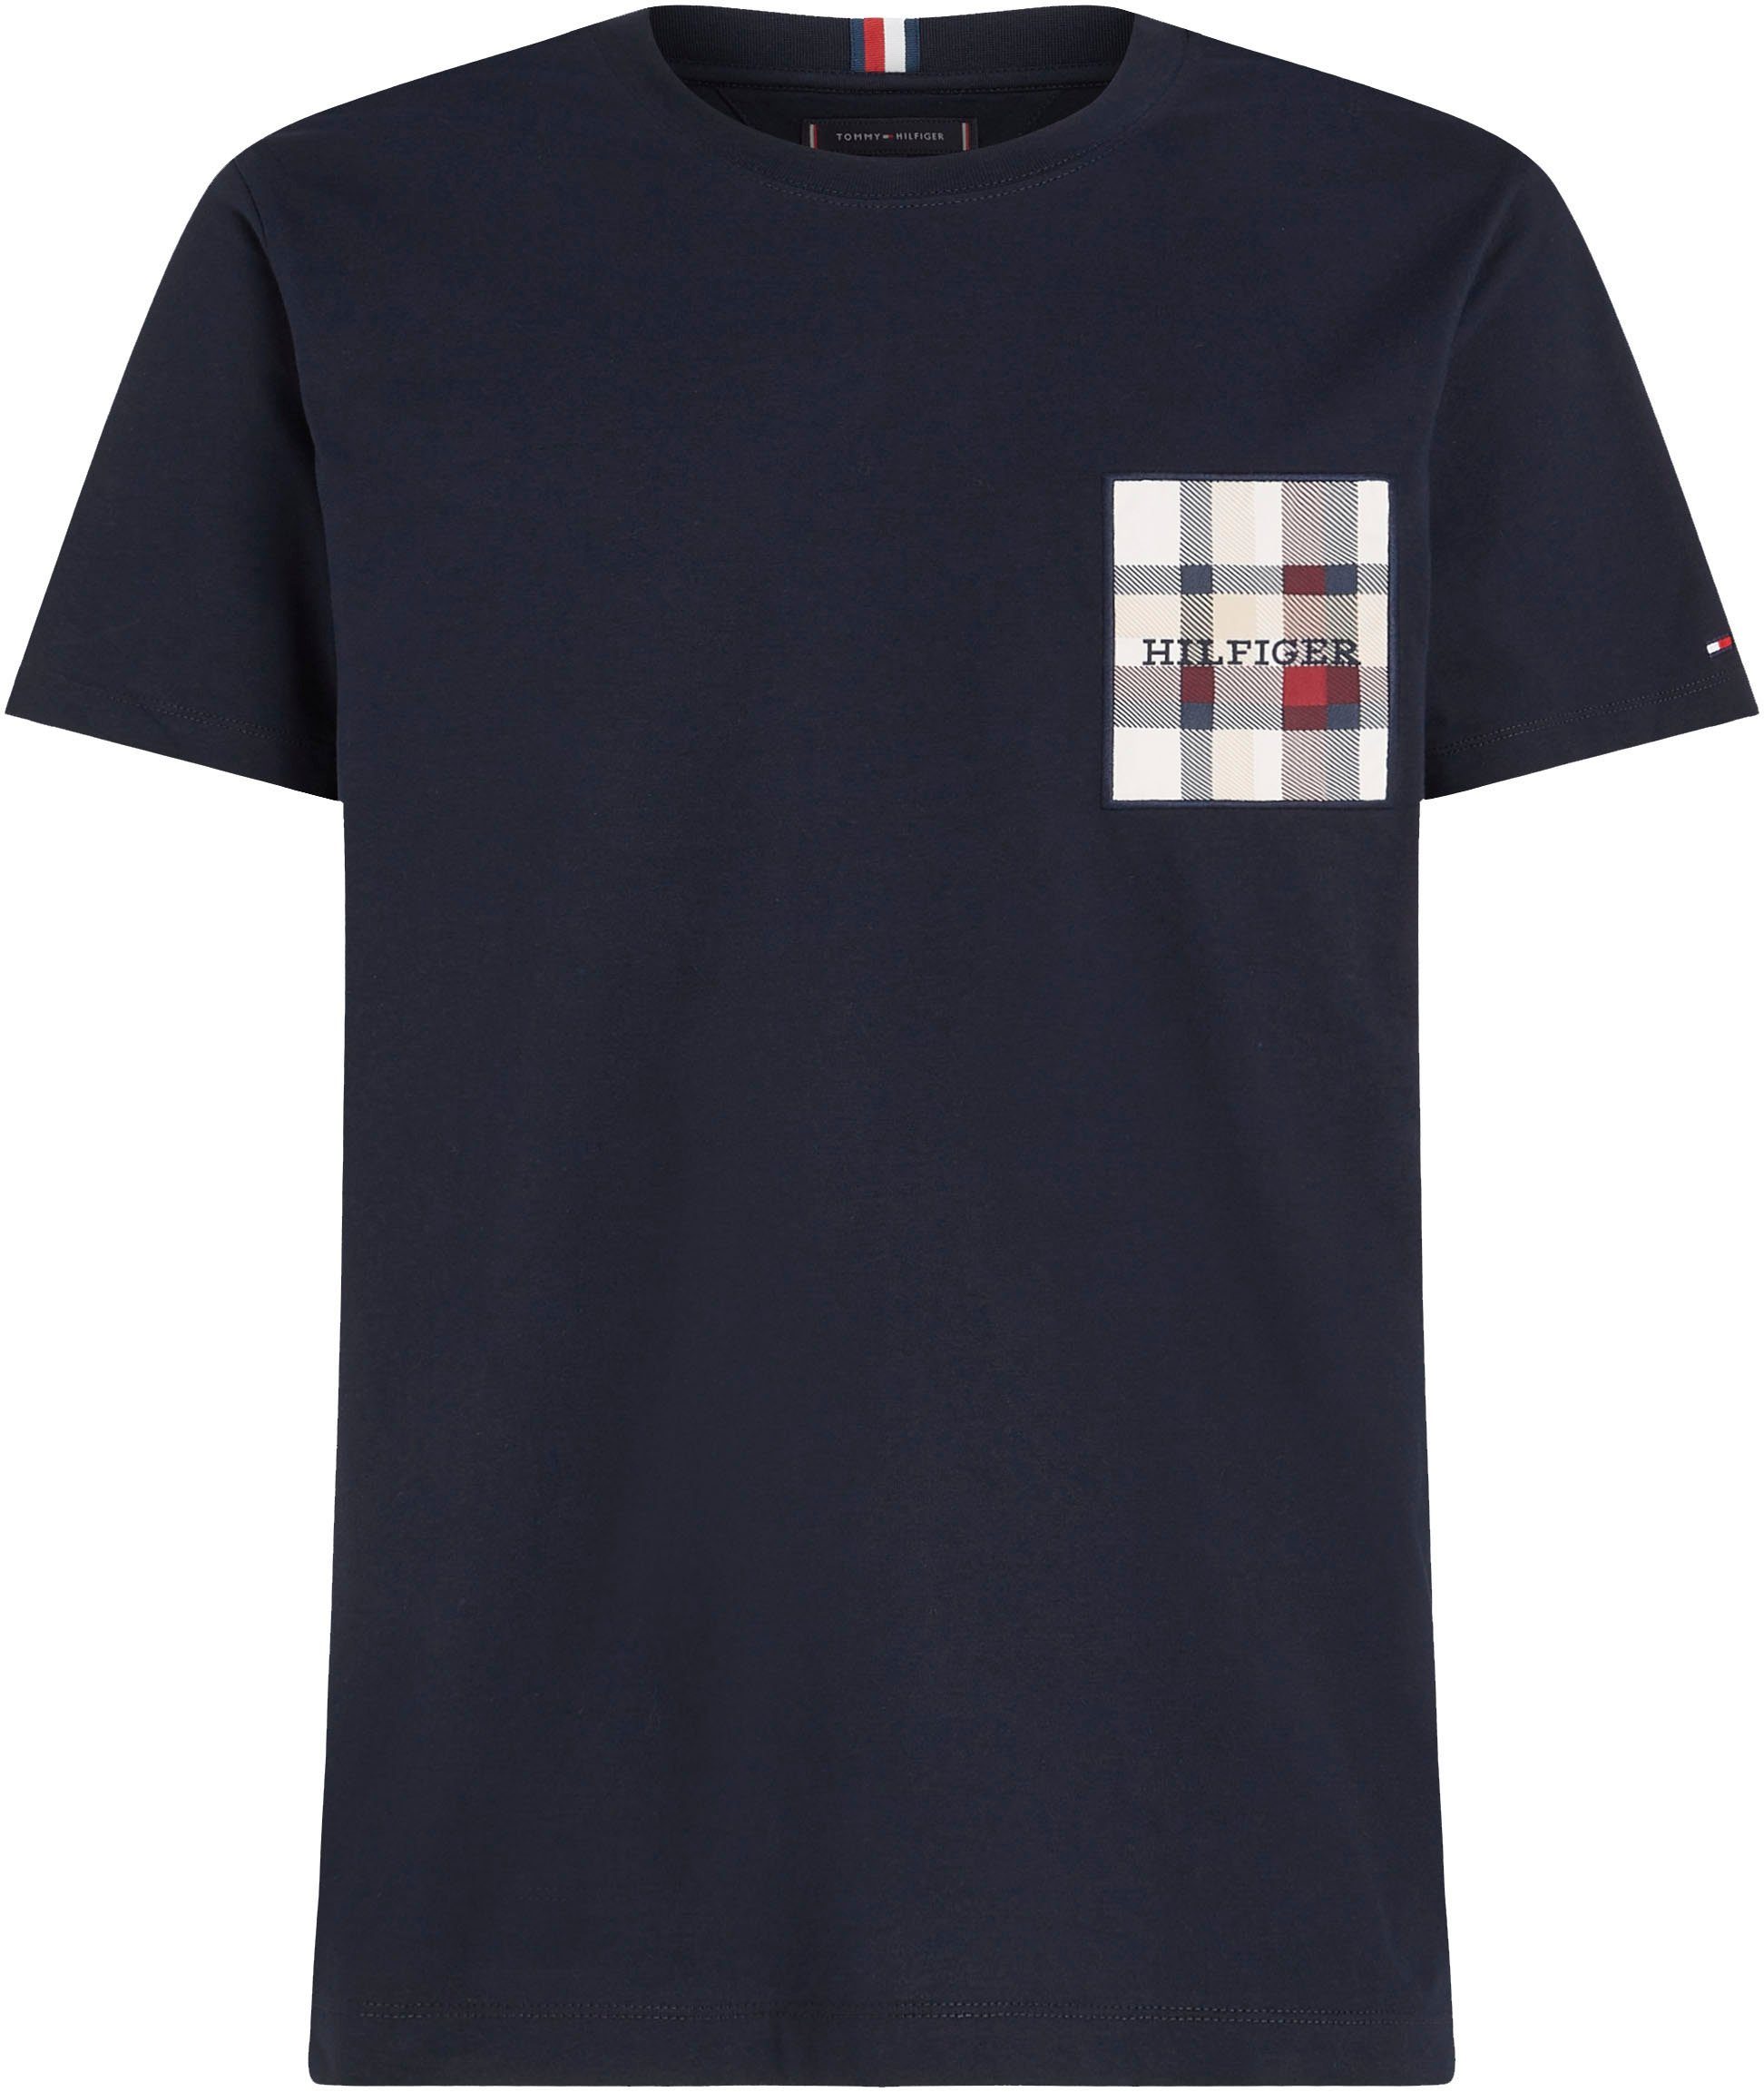 LABEL TEE T-Shirt Tommy Hilfiger CHECK MONOTYPE